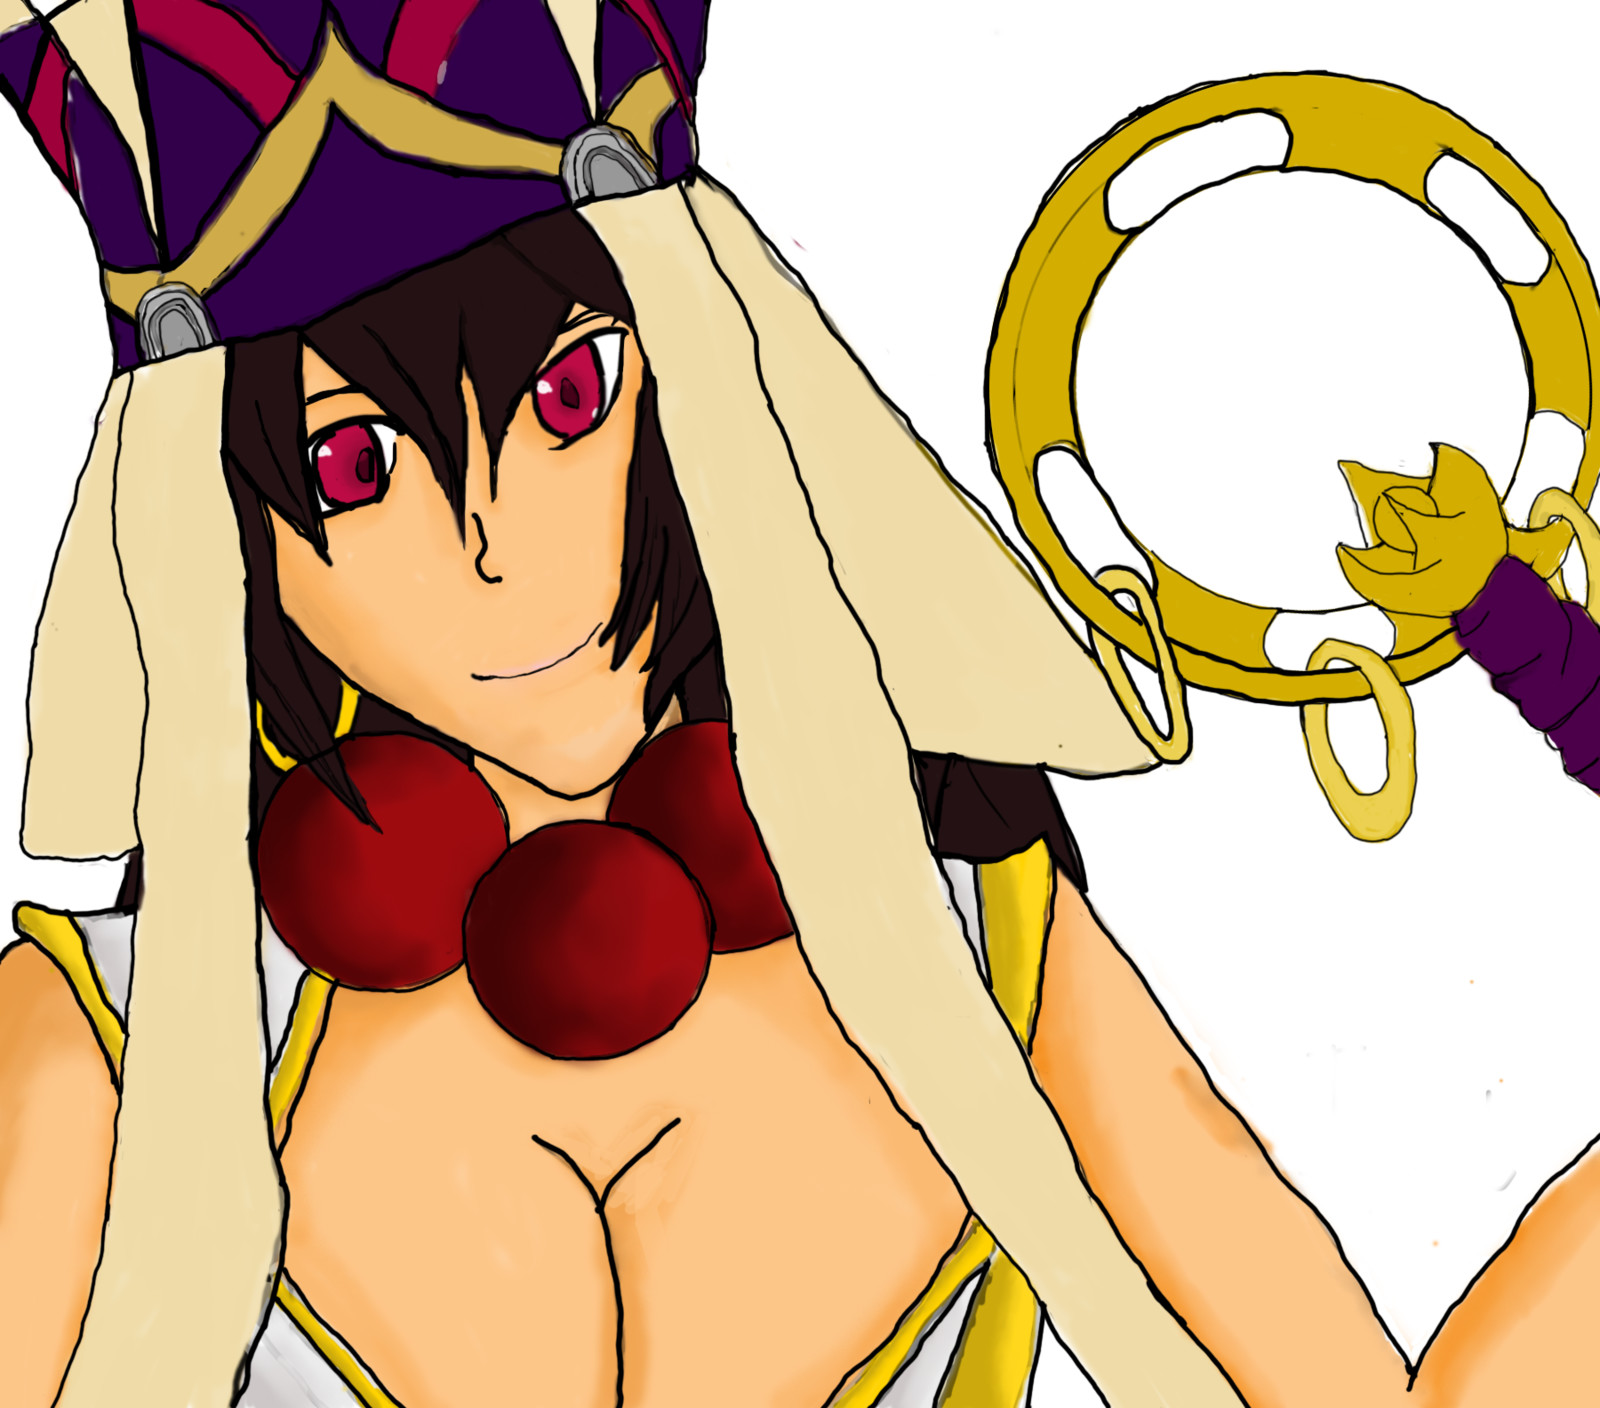 Next I shaded the clothes and the beads (or balls) around her neck.